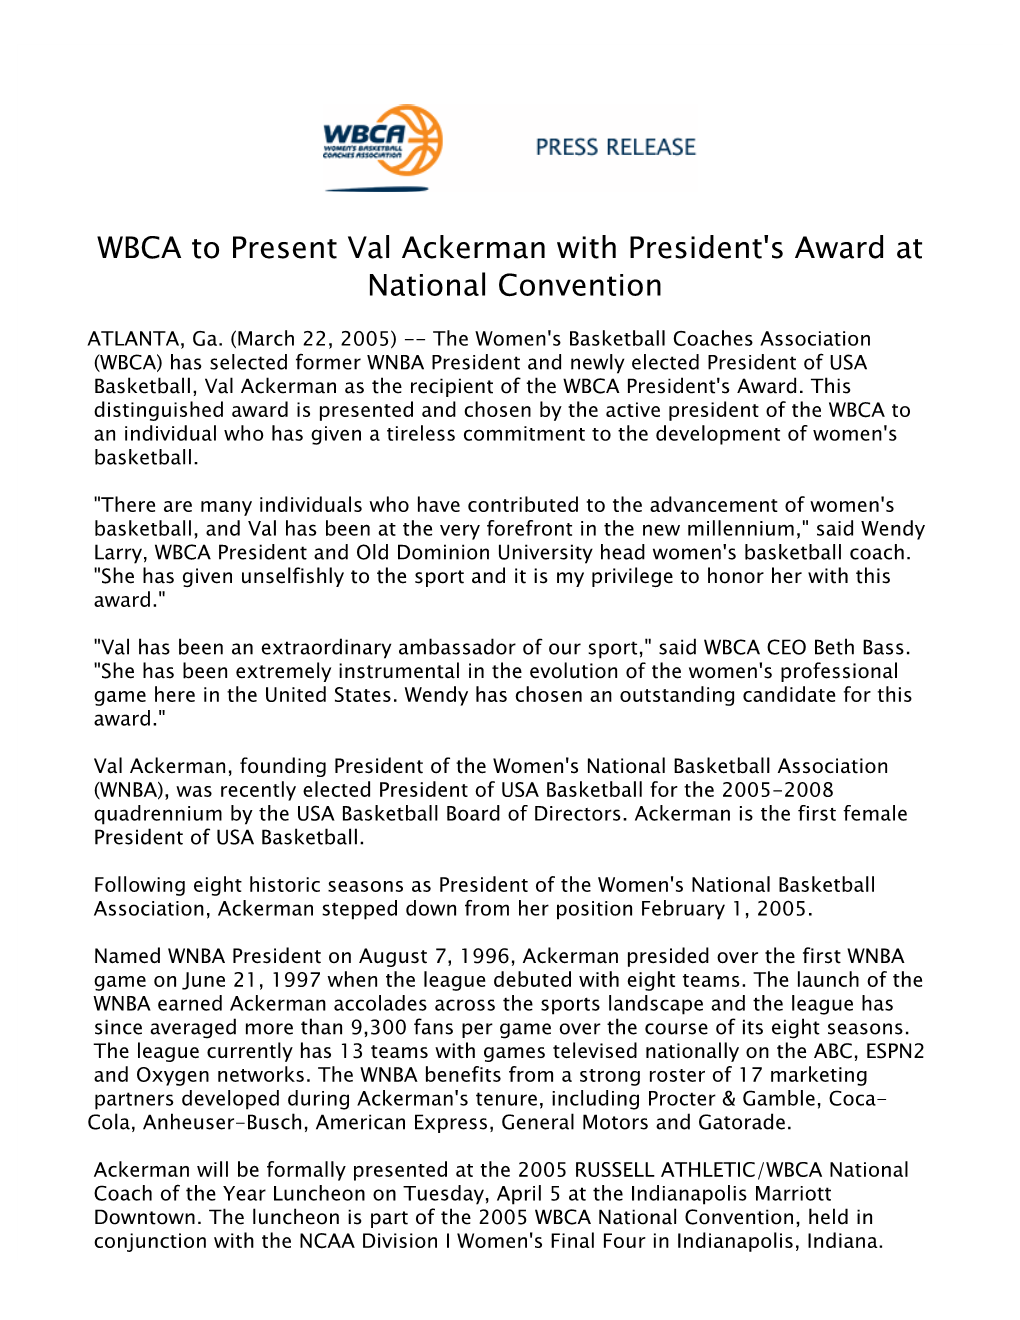 WBCA to Present Val Ackerman with President's Award at National Convention